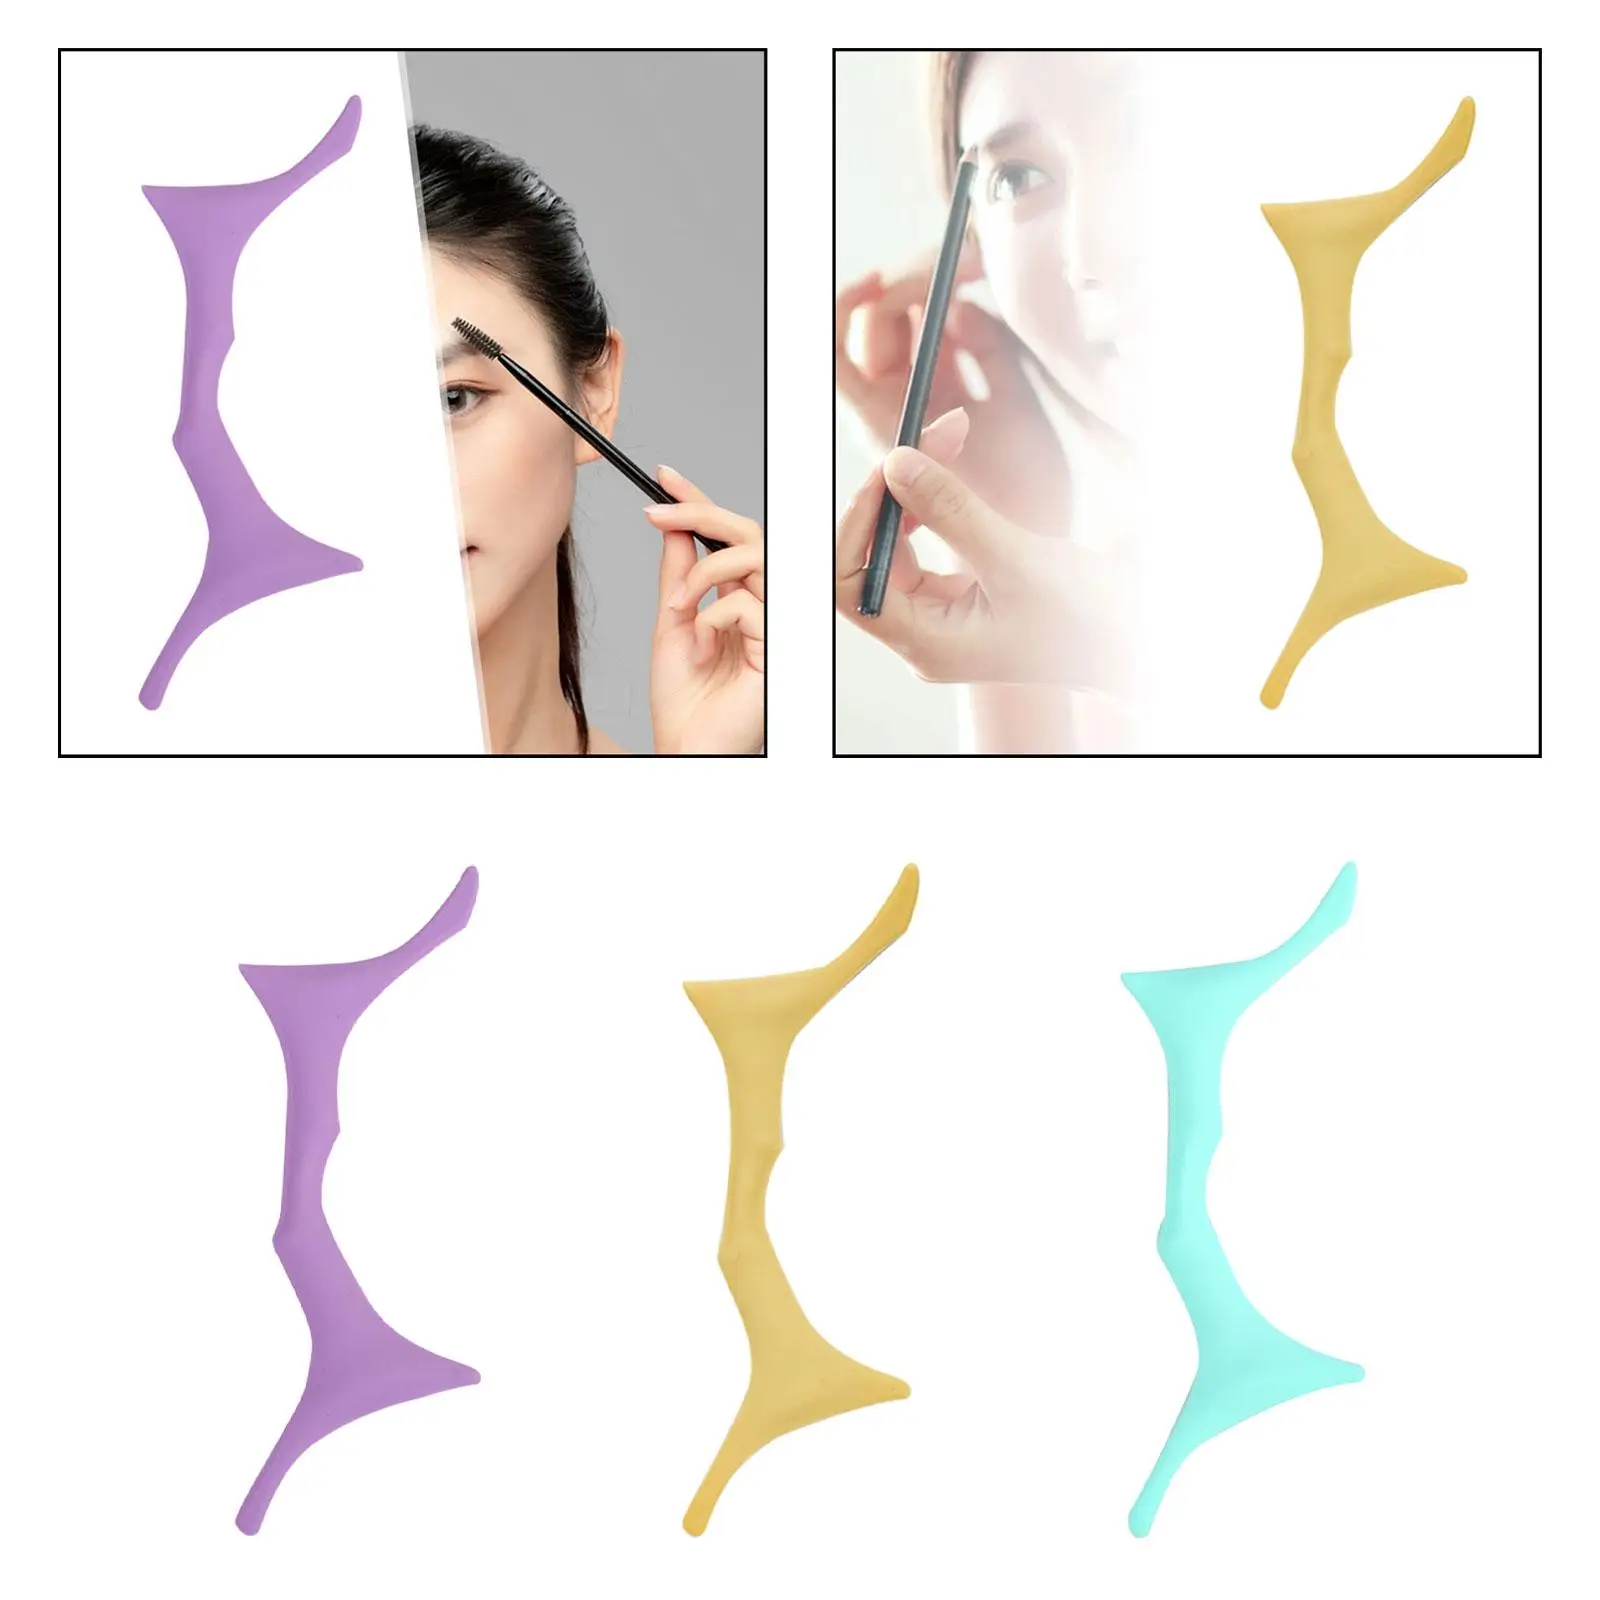 Silicone Eyebrow Shaping Aid Tool Eyeliner Stencil Reusable Multifunctional Sturdy for Beginners and Professional Makeup Artists